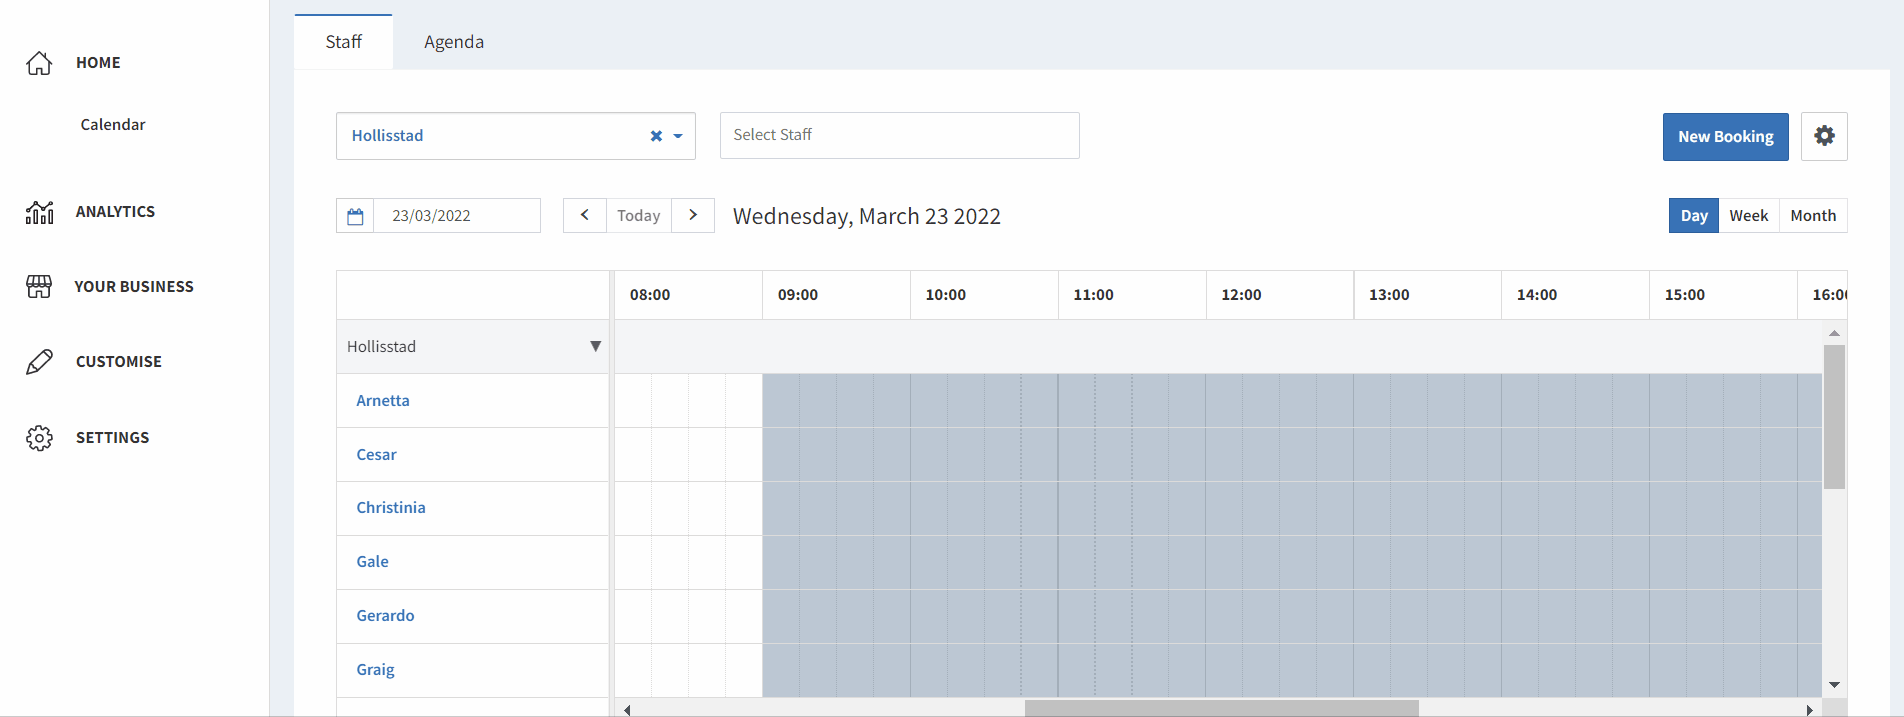 Changing groups on the calendar